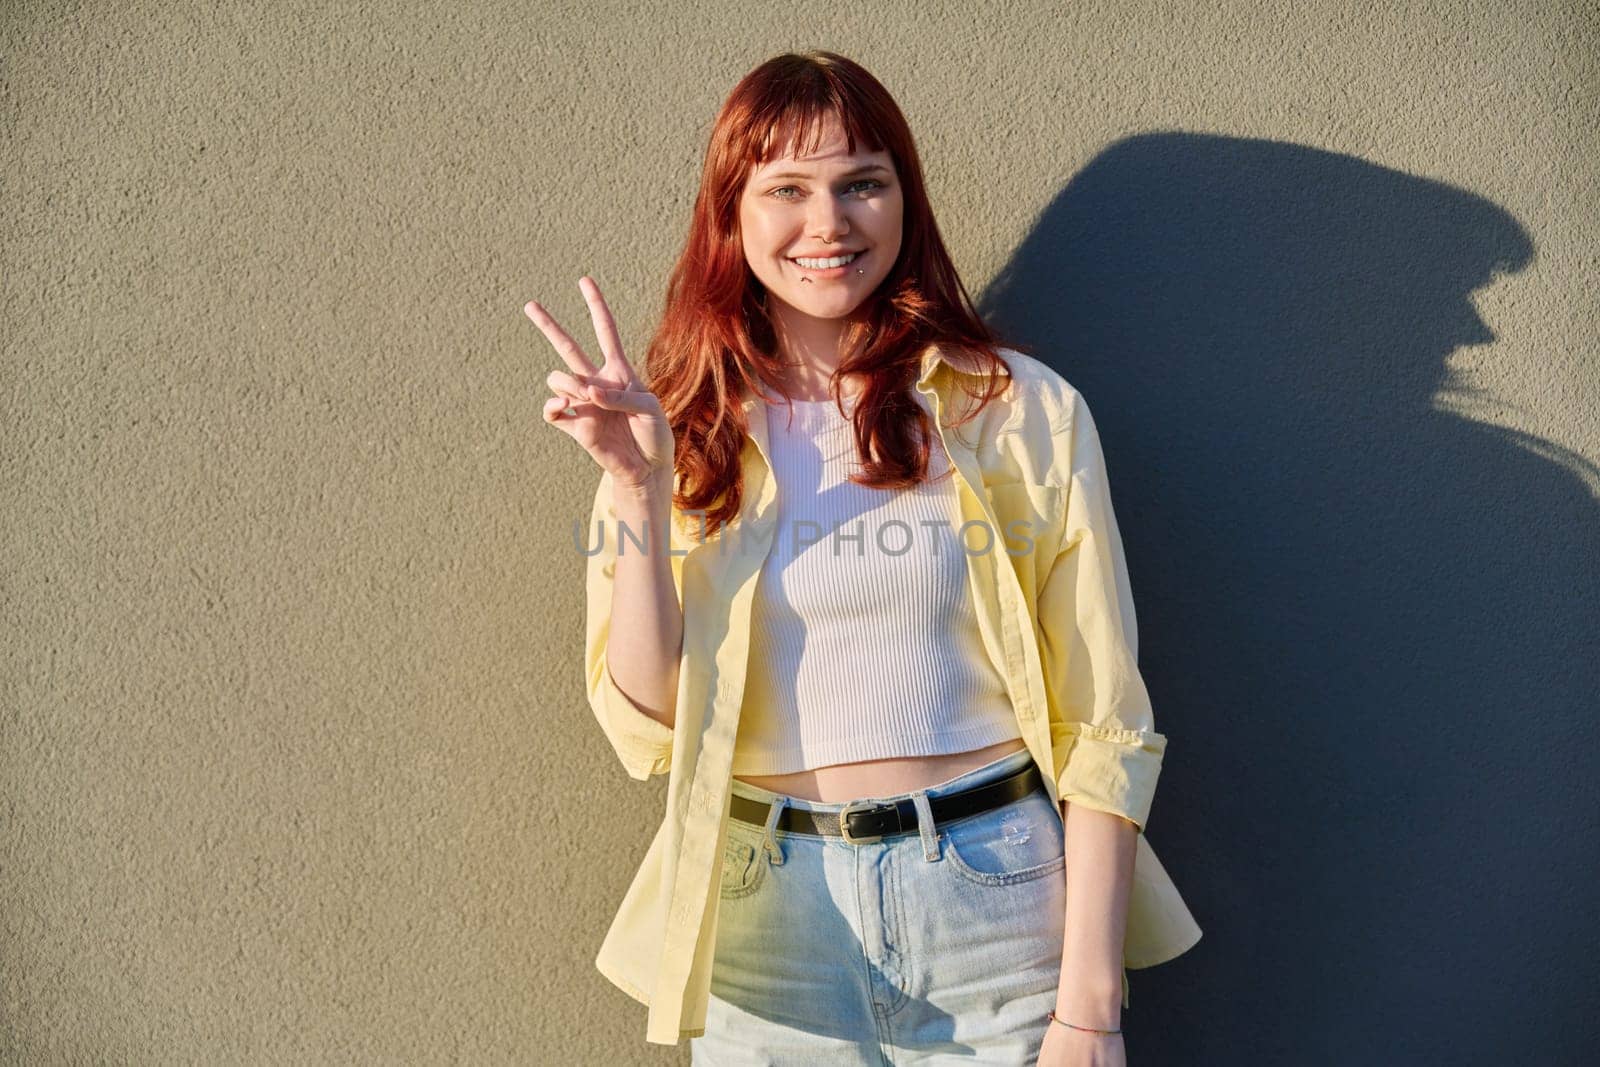 Young smiling beautiful attractive red-haired hipster female with facial piercing looking at camera outdoor, gray solar wall background. Beauty, fashion, piercing, style, lifestyle youth concept